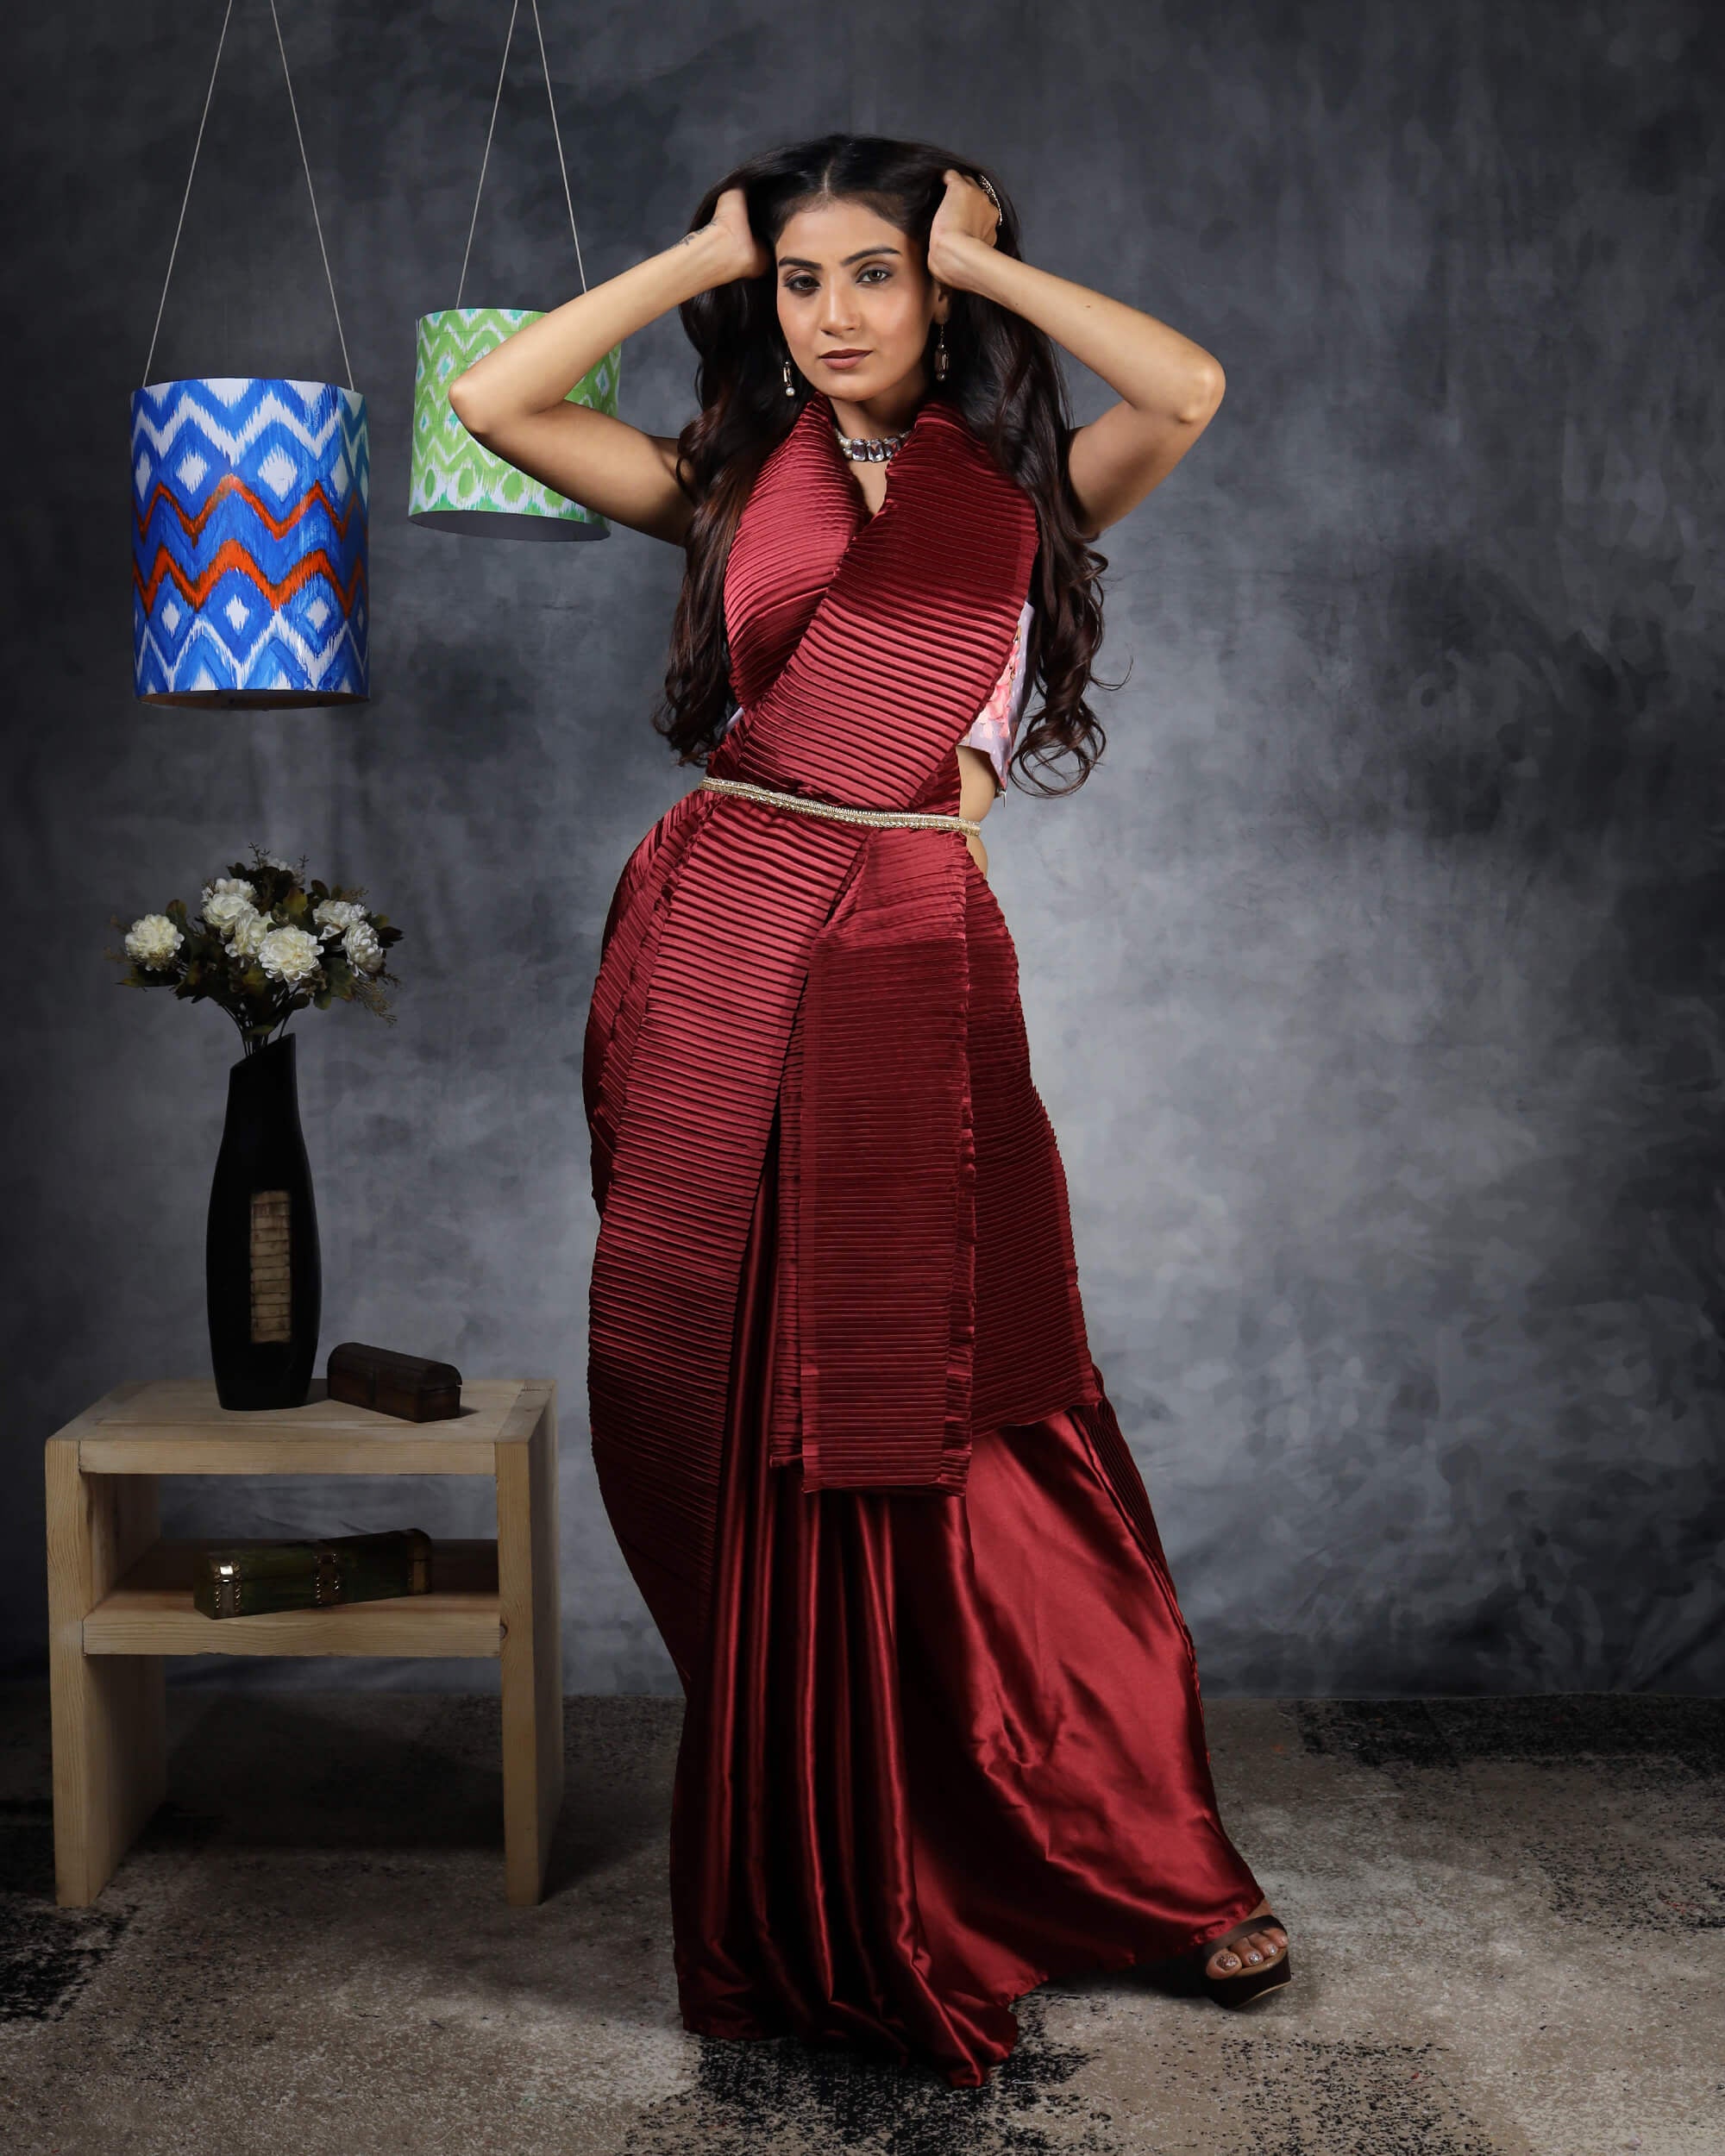 Embroidered Readymade Maroon Gown 211GW03